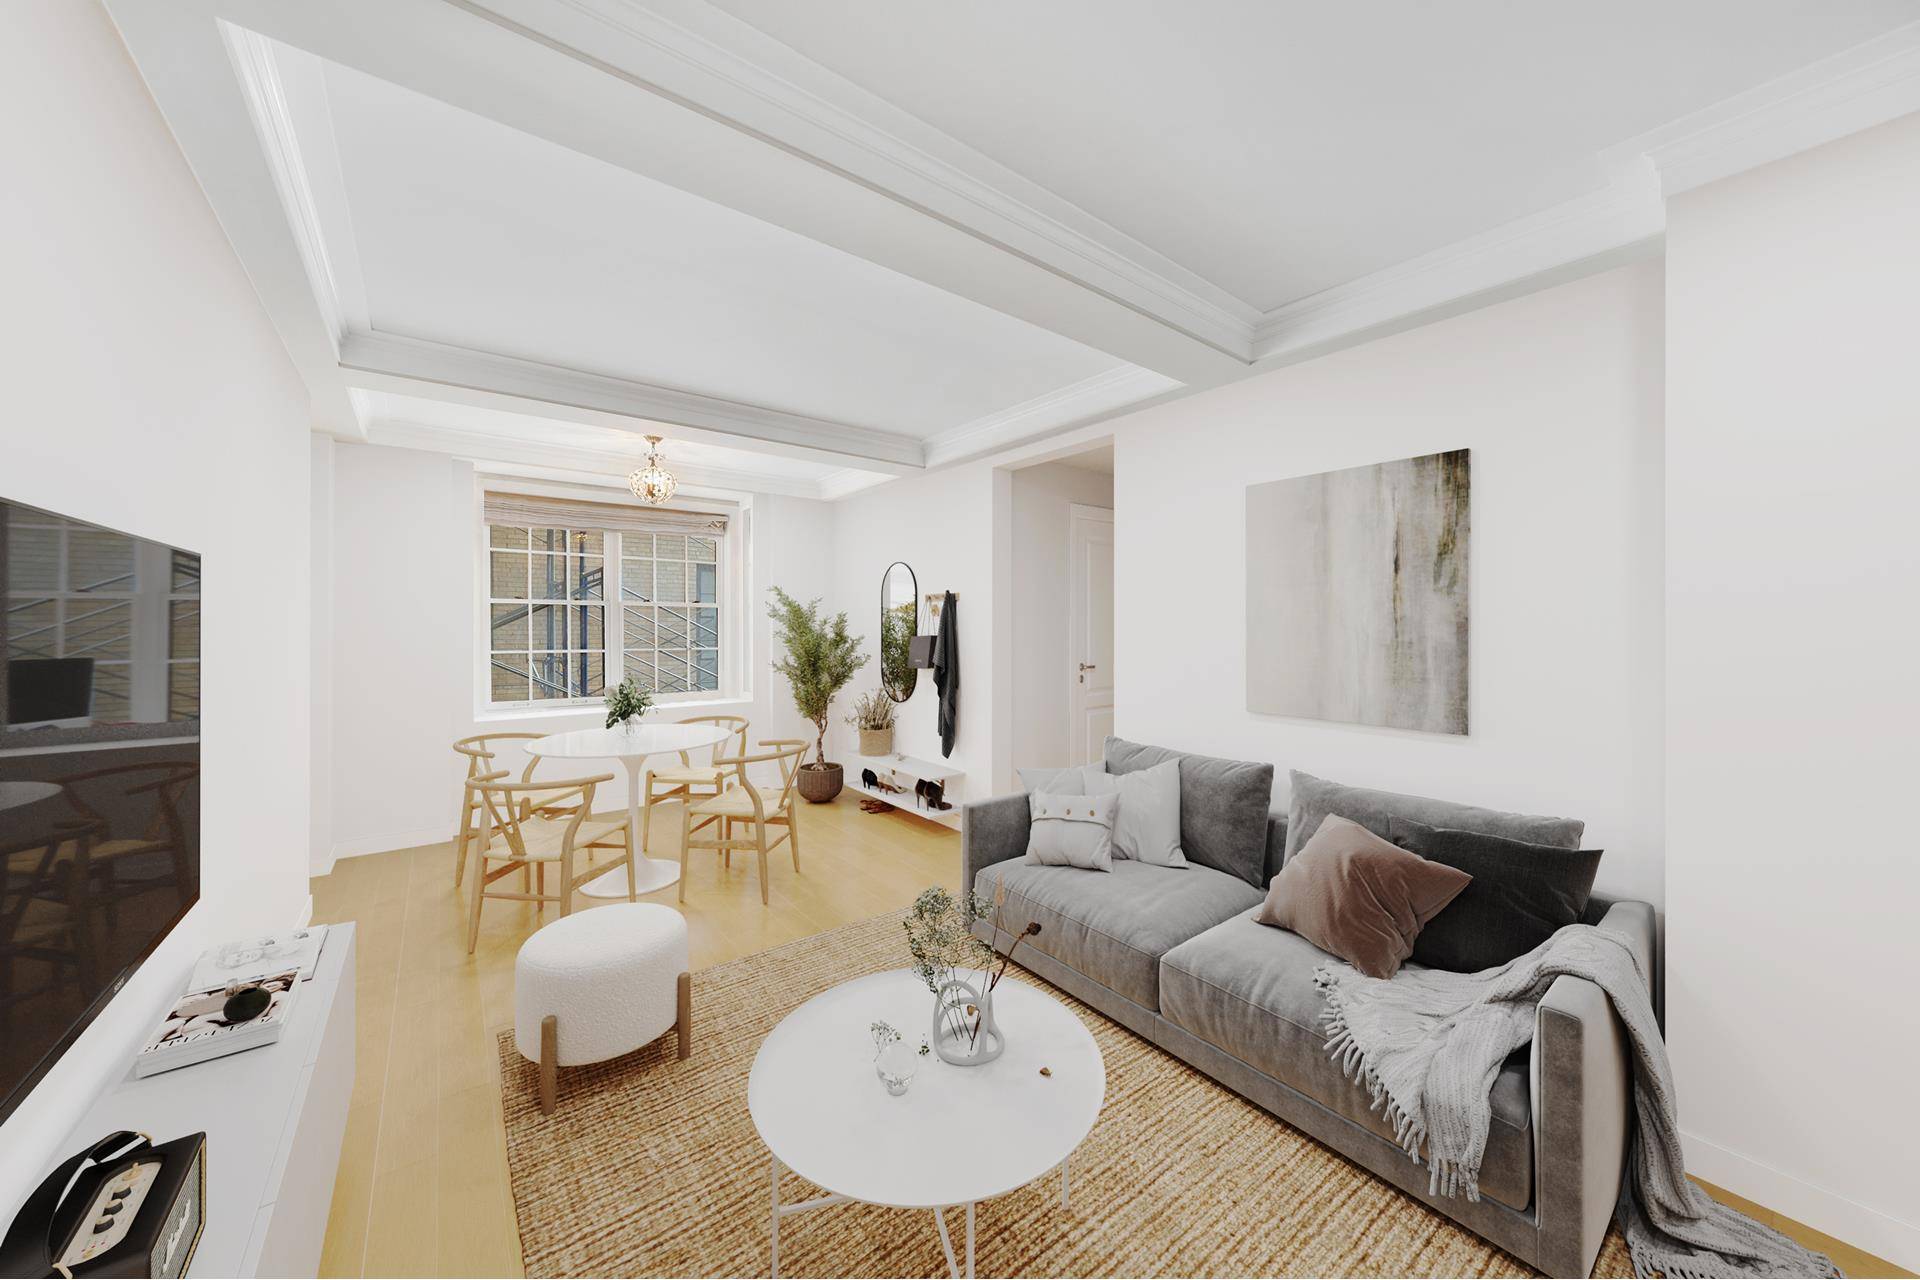 This exquisite two bedroom, two bathroom residence is situated within the renowned Philip House in the esteemed Carnegie Hill neighborhood of the Upper East Side.